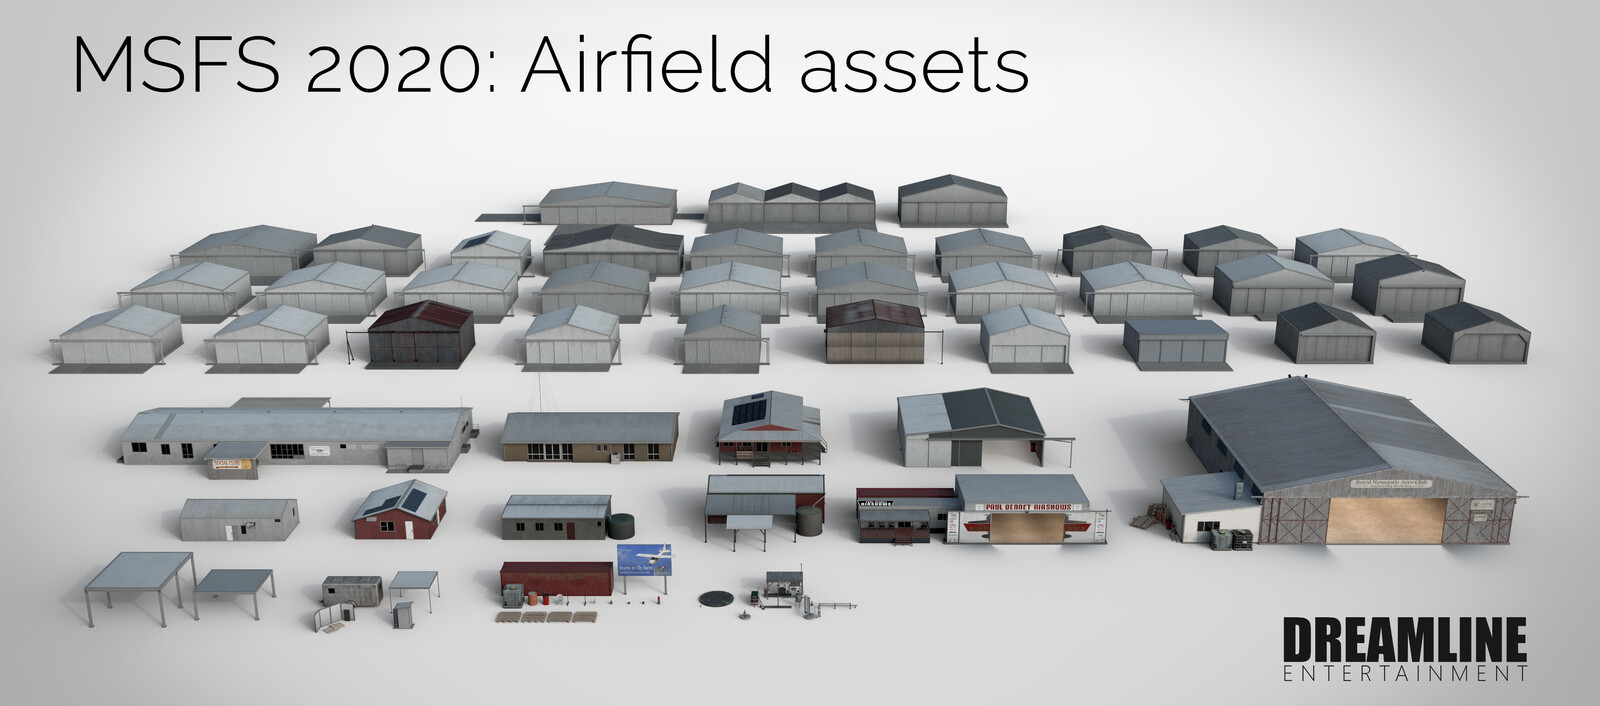 MSFS 2020: Airfield assets